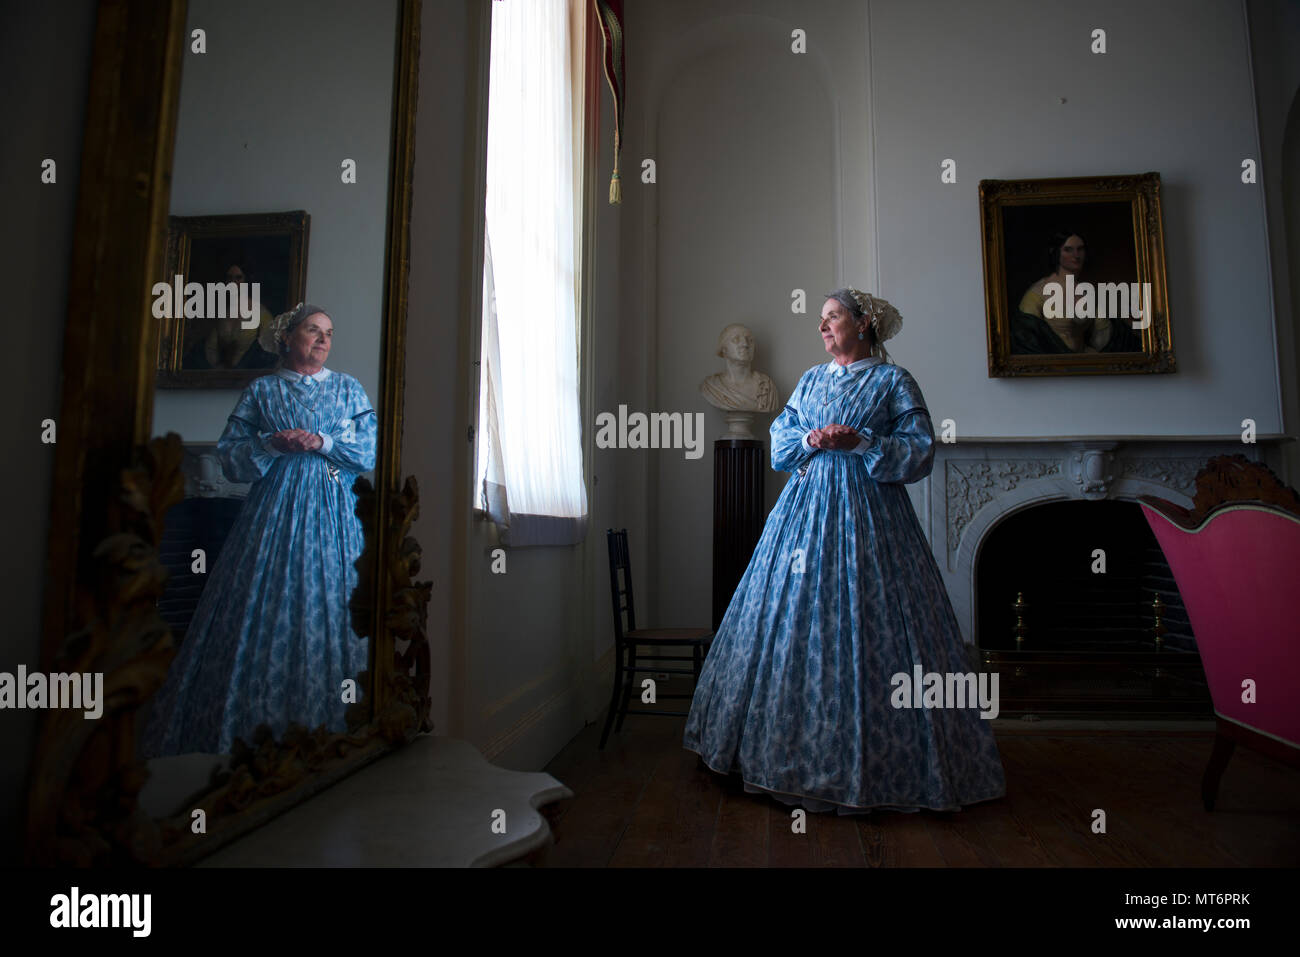 Docent volunteer, Roberta 'Bobbie' Jones, stands in the White Parlor room of the Arlington House, a Robert E. Lee Memorial, in Arlington National Cemetery, Arlington, Va., July 19, 2017.  In July of 2015, philanthropist David M. Rubinstein announced a $12.35 million donation to the National Park Foundation’s Centennial Campaign for America’s National Parks to restore and improve access to Arlington House.  This work is scheduled to begin in late August 2017, limiting access to visitors.  (U.S. Army photo by Elizabeth Fraser / Arlington National Cemetery / released) Stock Photo